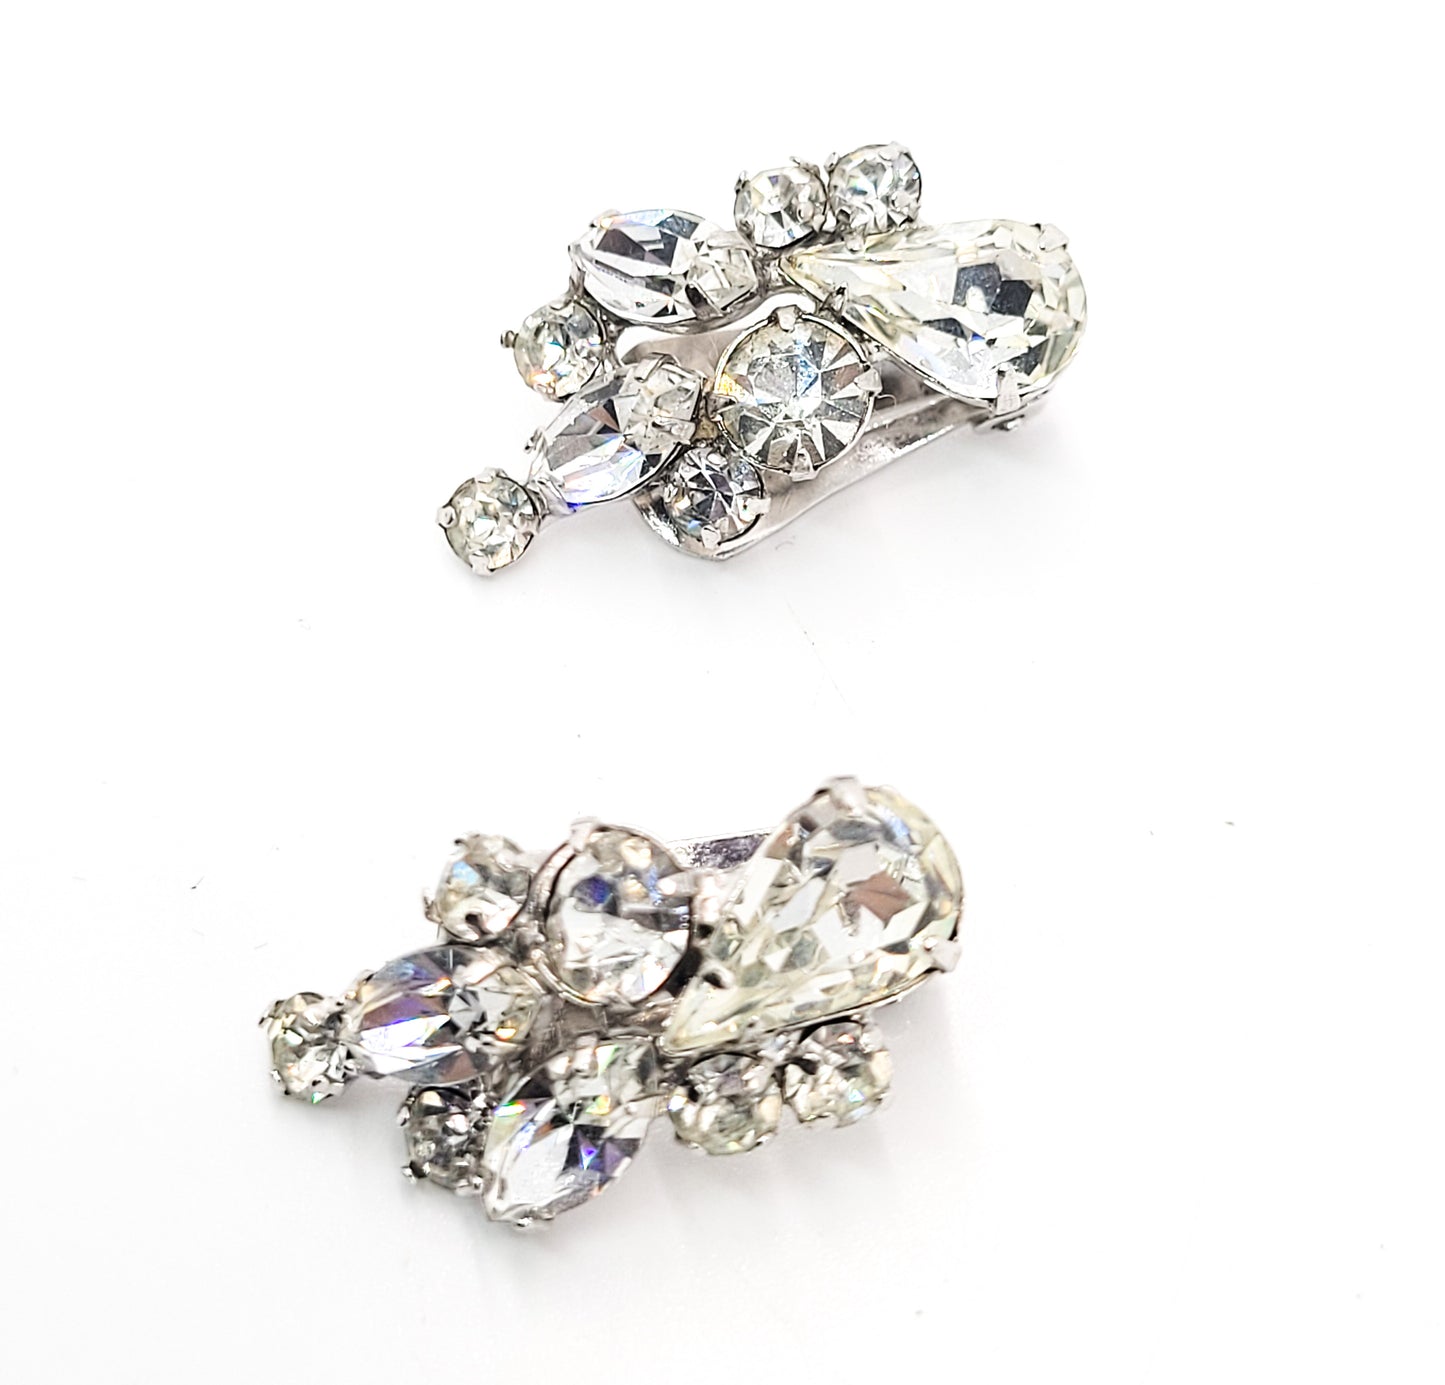 Mid century bright clear and silver crystal vintage rhinestone clip on earrings